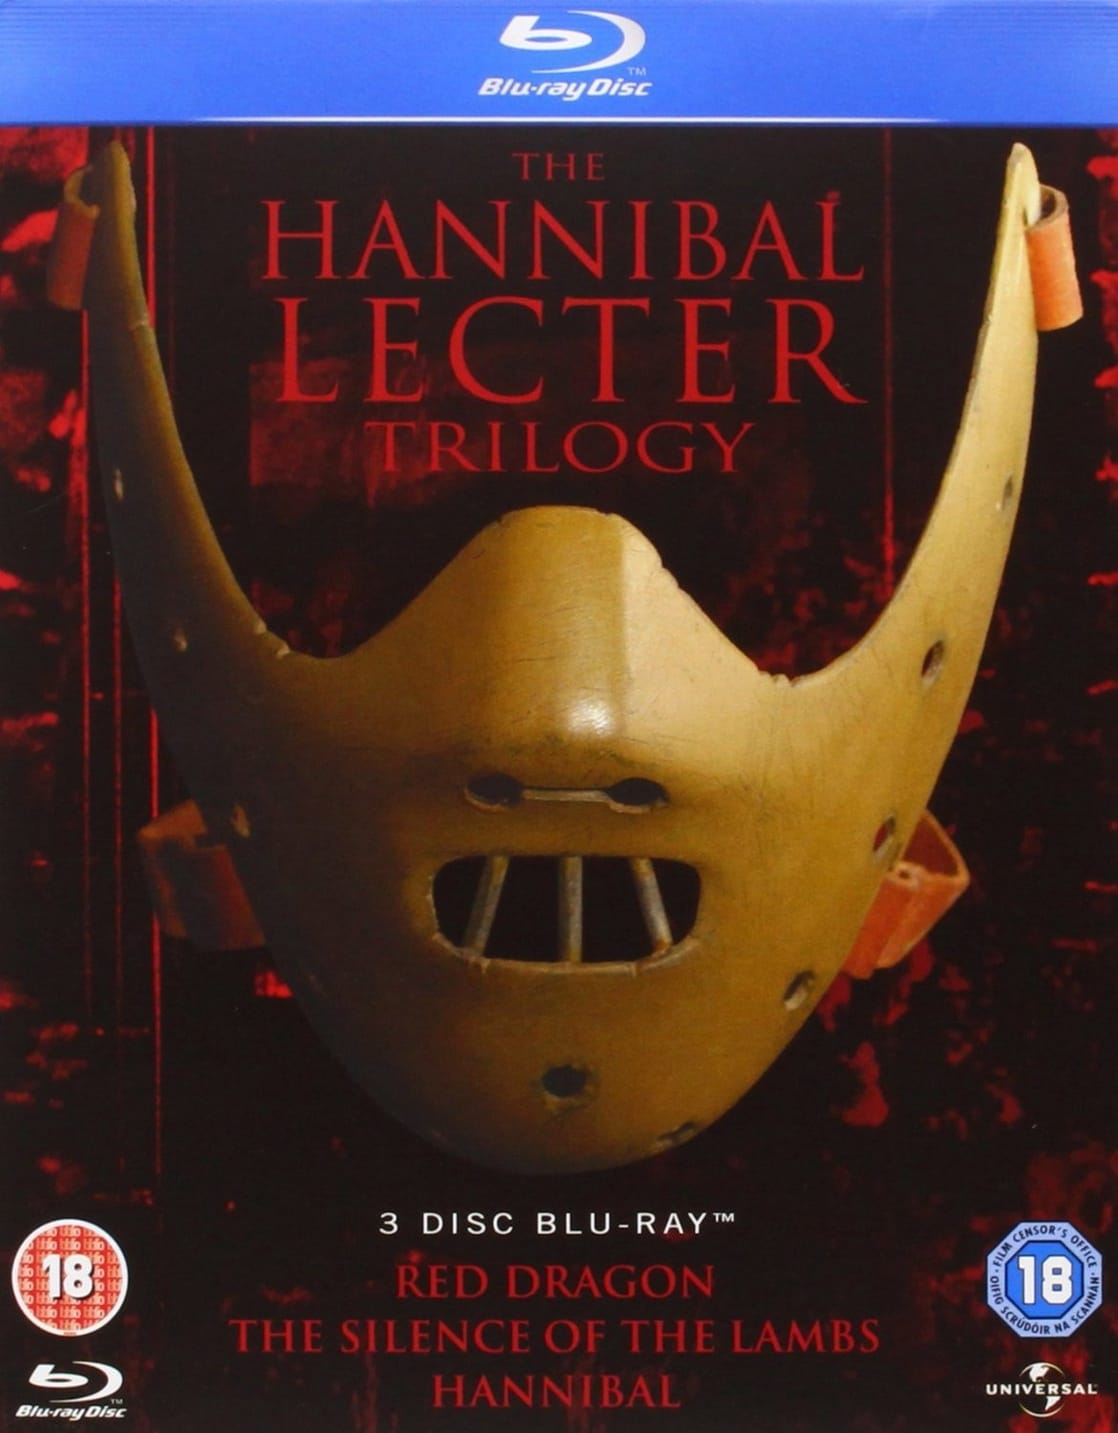 The Hannibal Lecter Trilogy -- The Silence of the Lambs / Hannibal / Red Dragon  